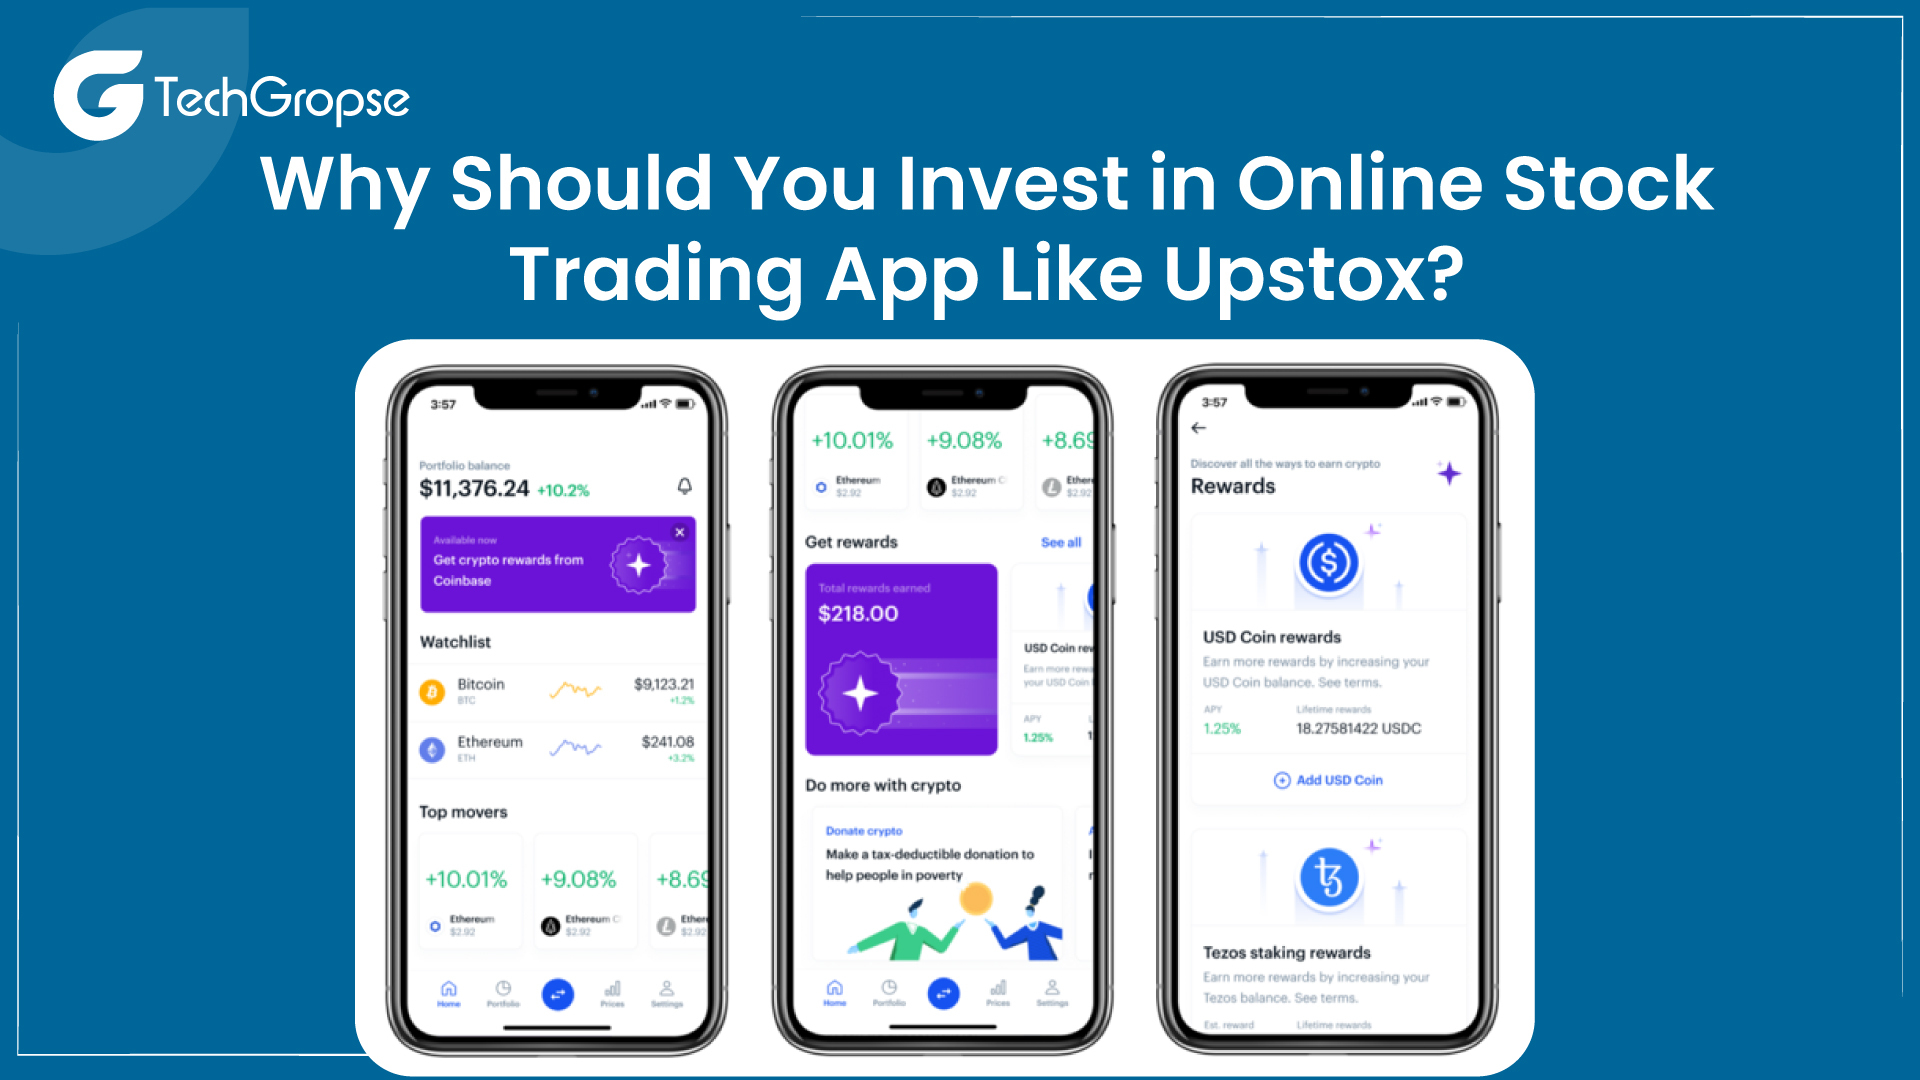 Why Should You Invest in Online Stock Trading App Like Upstox?